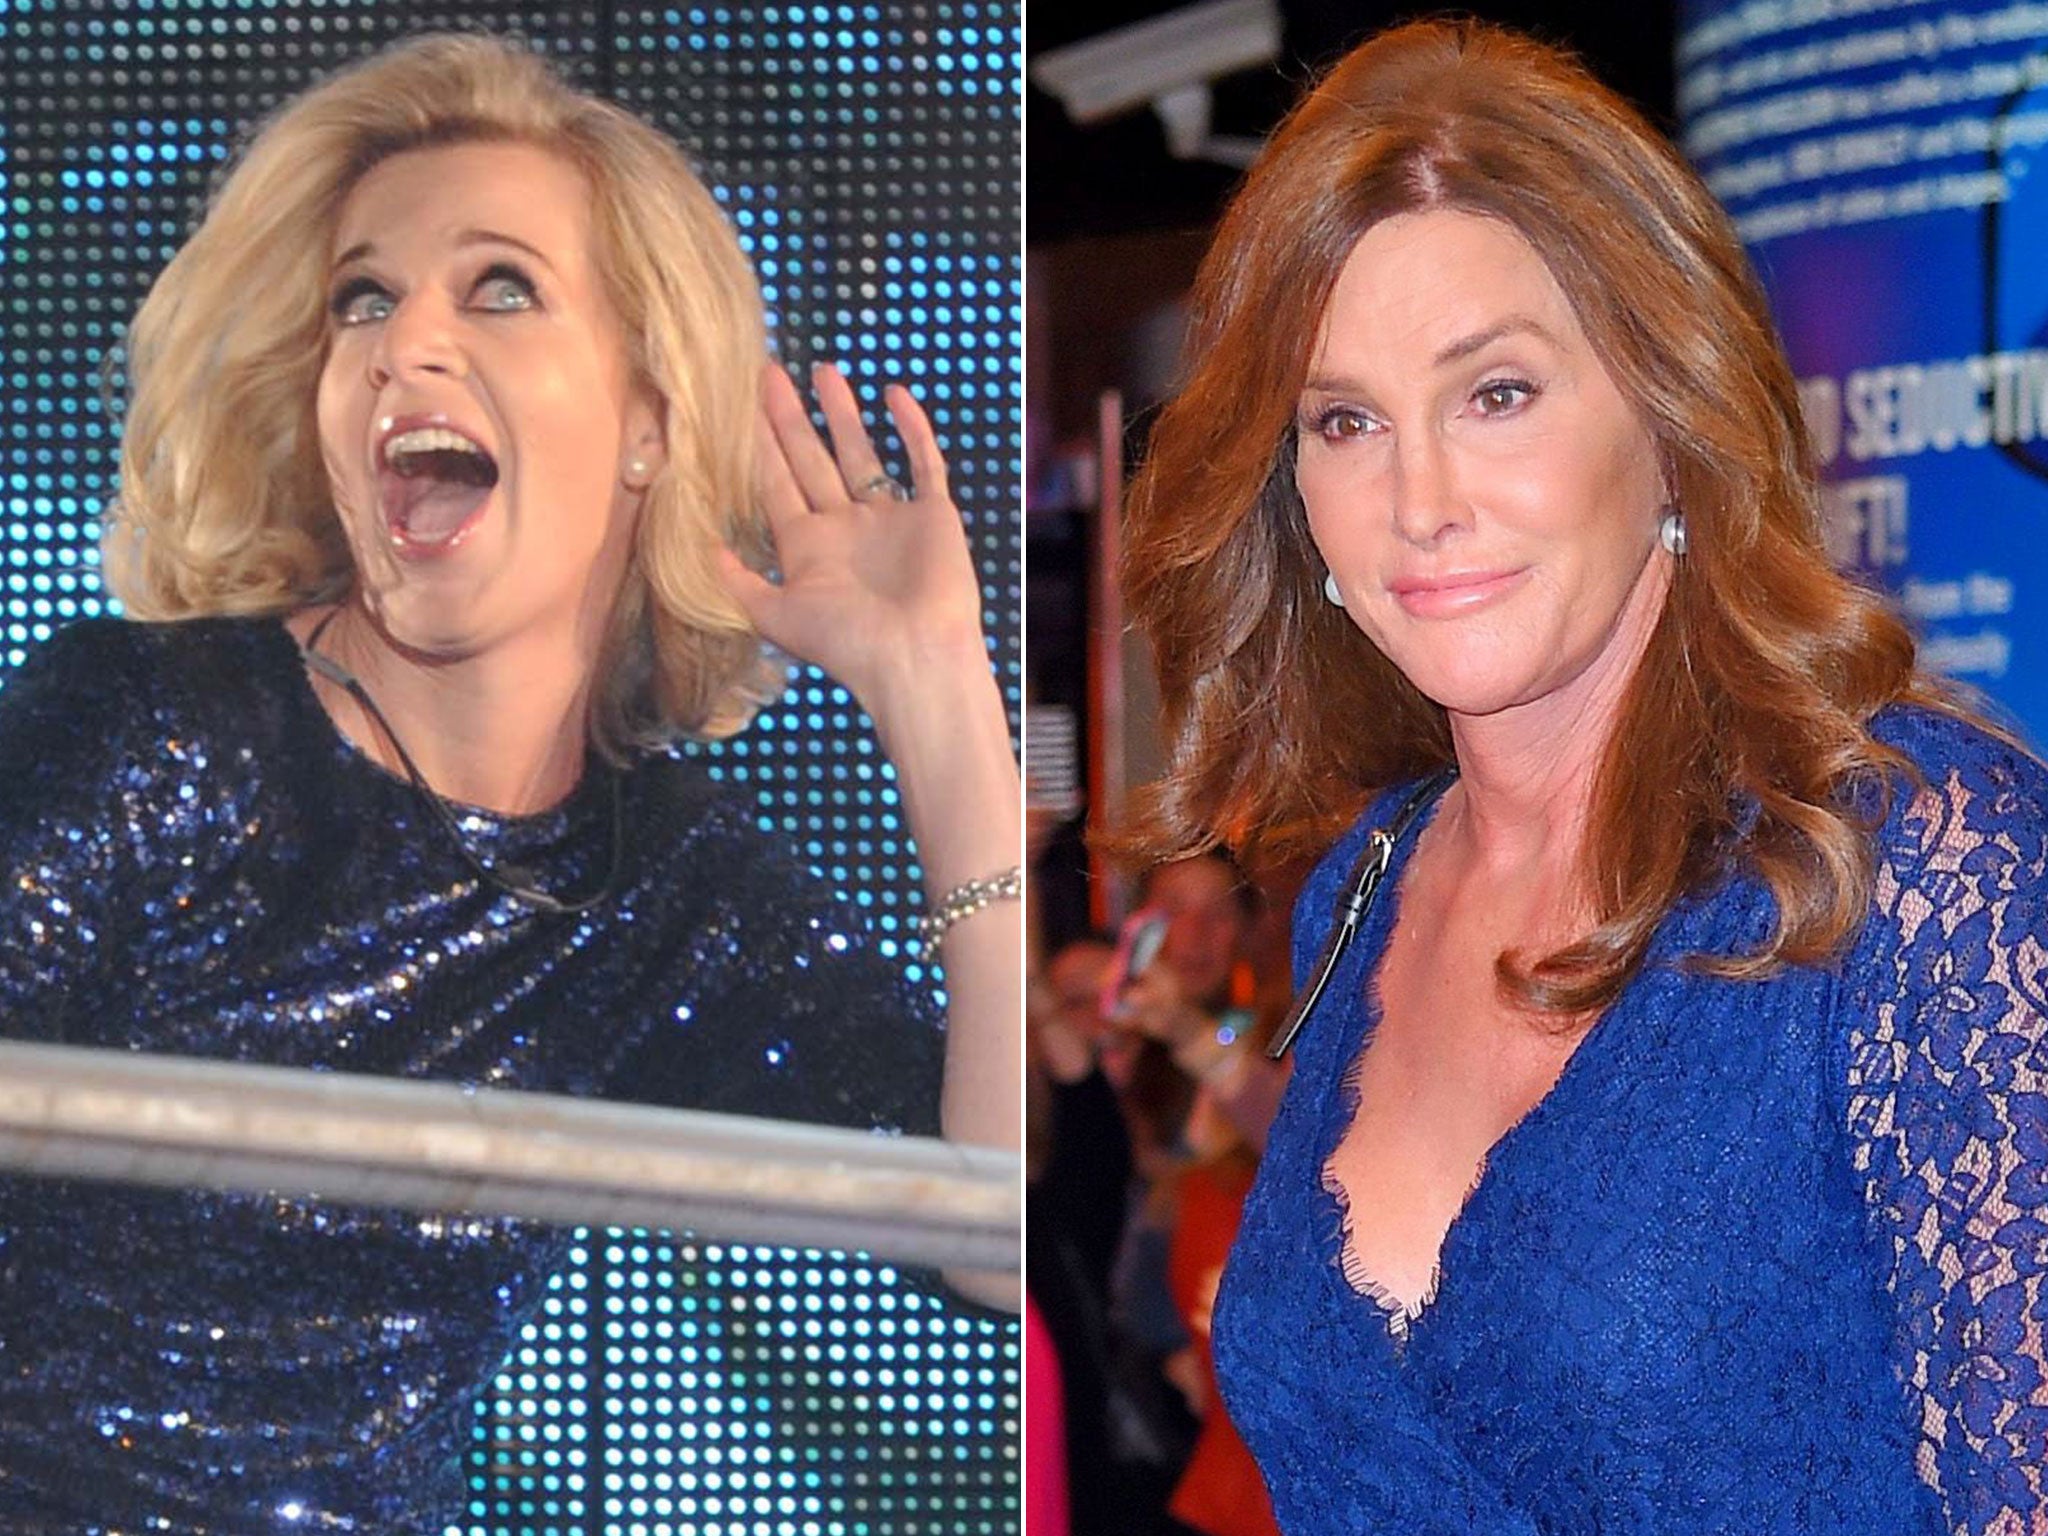 Katie Hopkins thinks Olympic athelete Caitlyn Jenner should 'do something' with her life